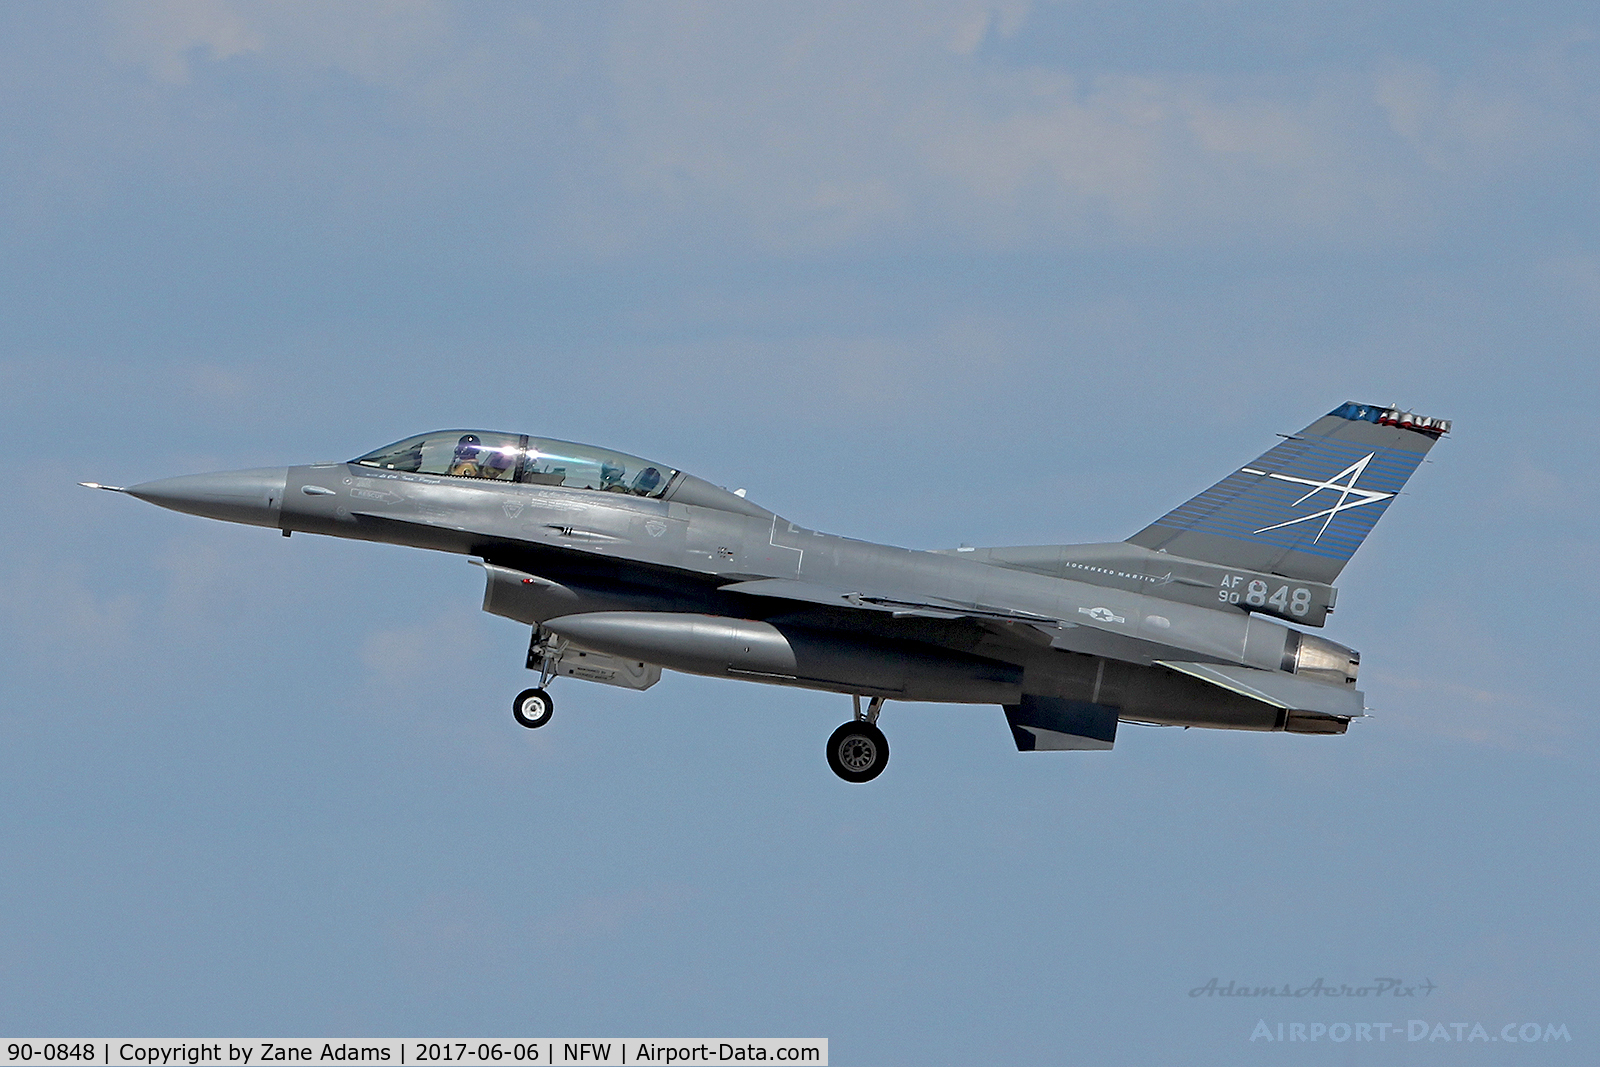 90-0848, 1990 General Dynamics F-16D Fighting Falcon C/N CD-15, Departing NAS Fort Worth